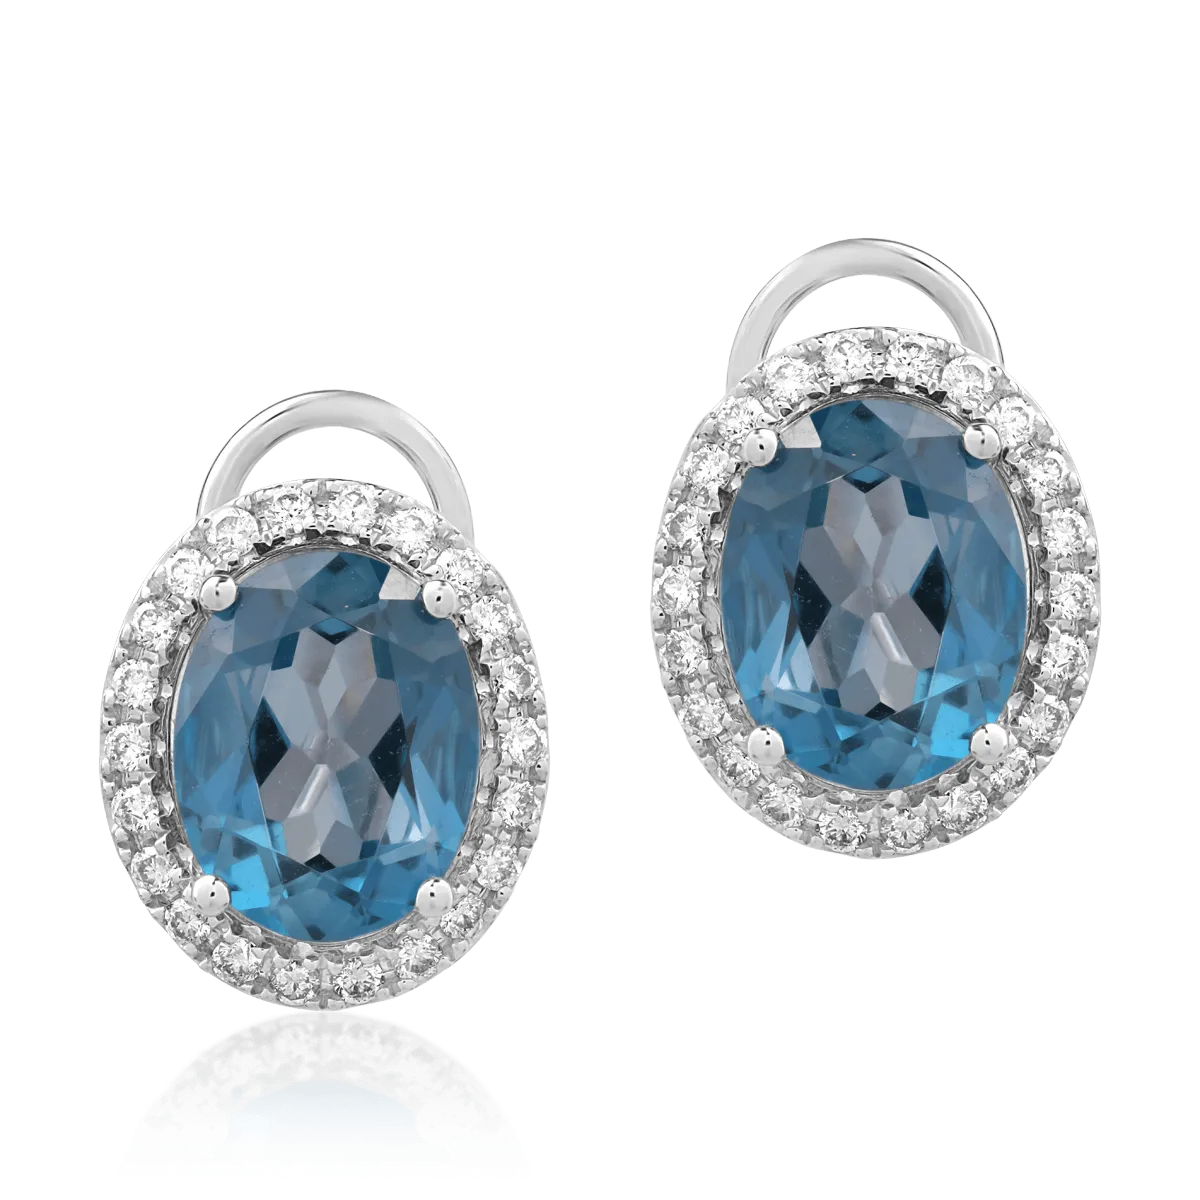 18K white gold earrings with 4.1ct London blue topaz and 0.1ct diamonds